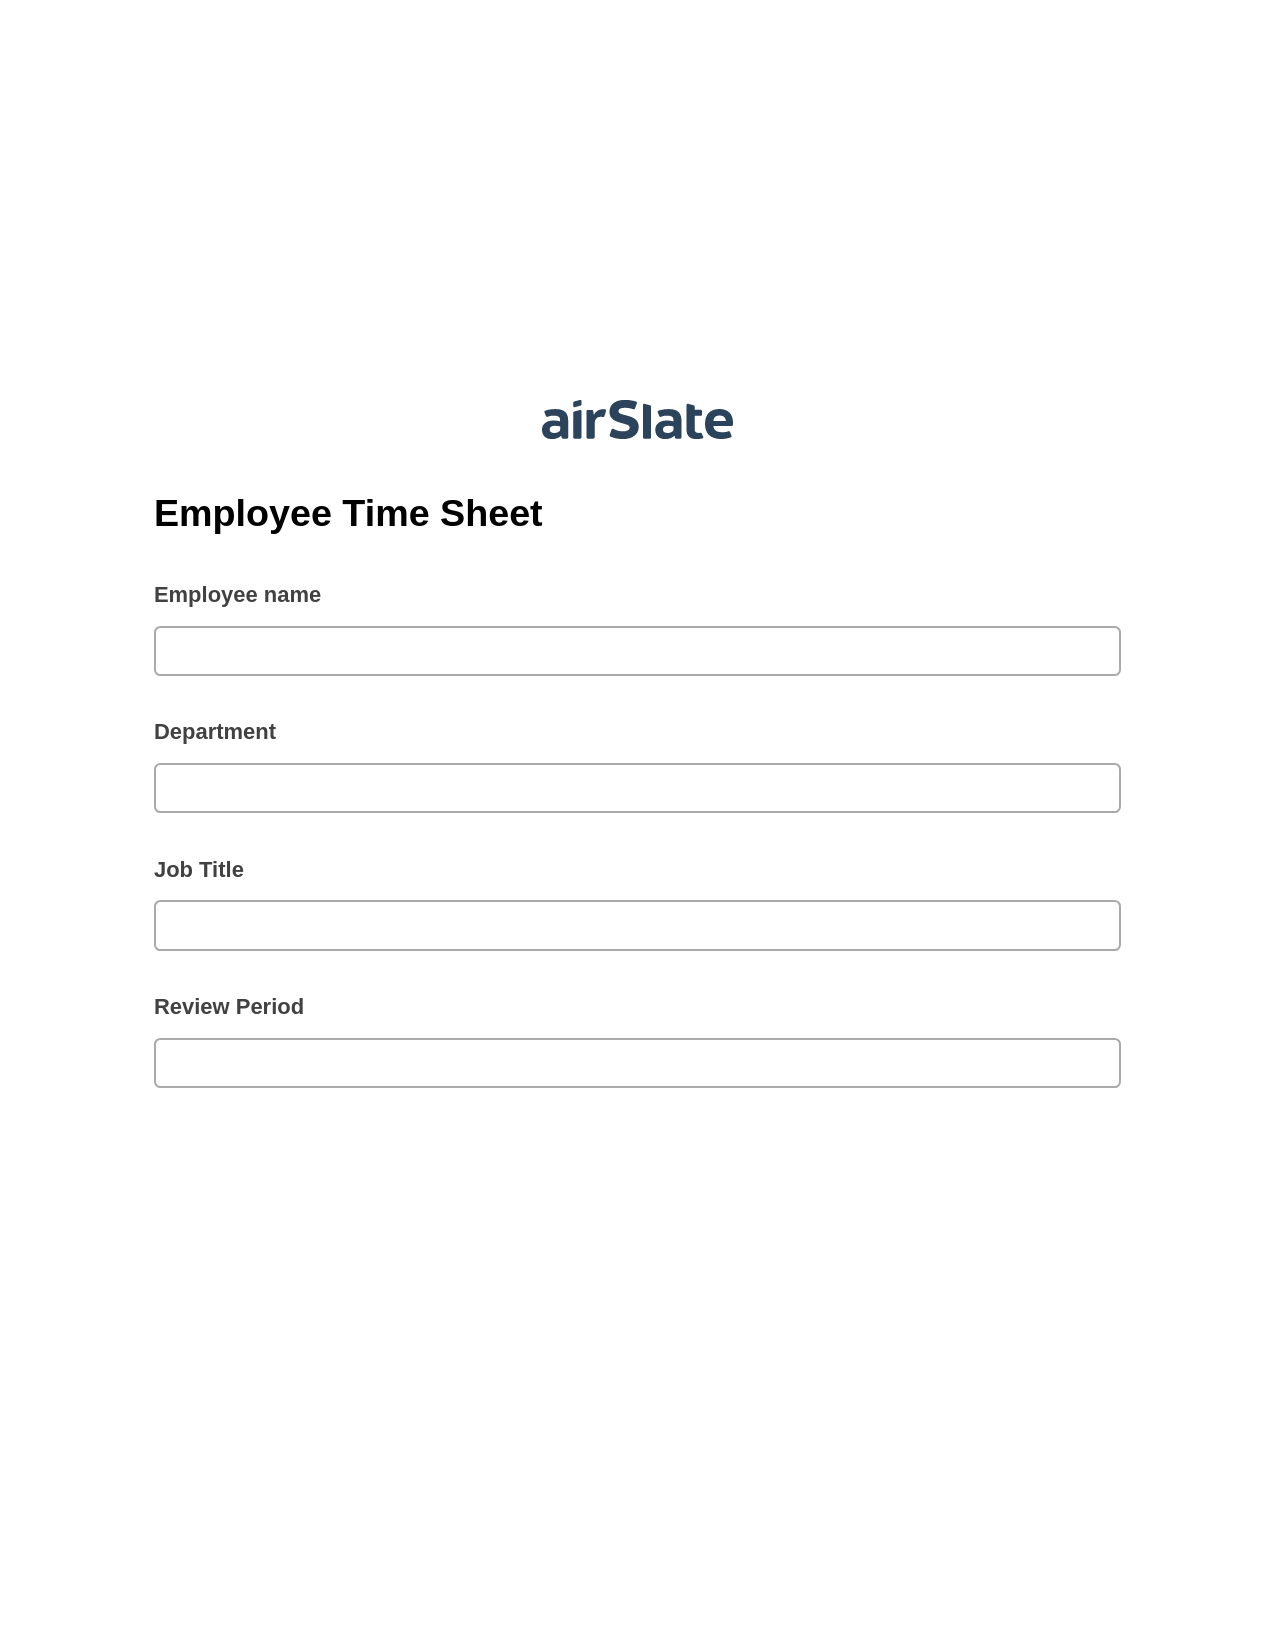 Multirole Employee Time Sheet Pre-fill from Google Sheets Bot, Create Salesforce Records Bot, Export to Excel 365 Bot